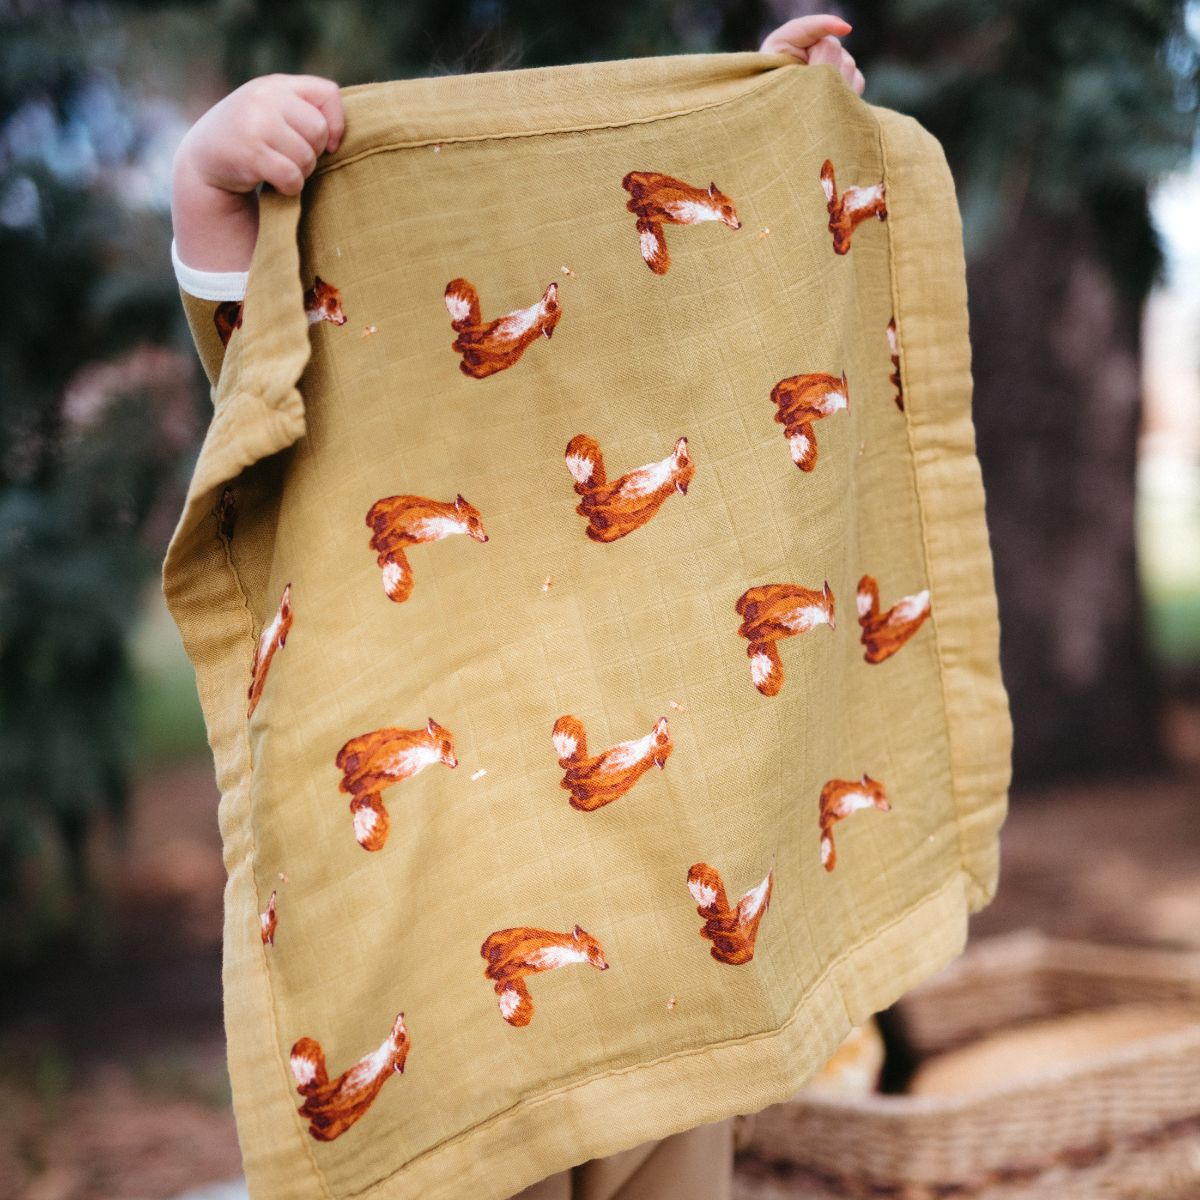 A child in the forest holds up the Gold Fox Mini Lovey security blanket